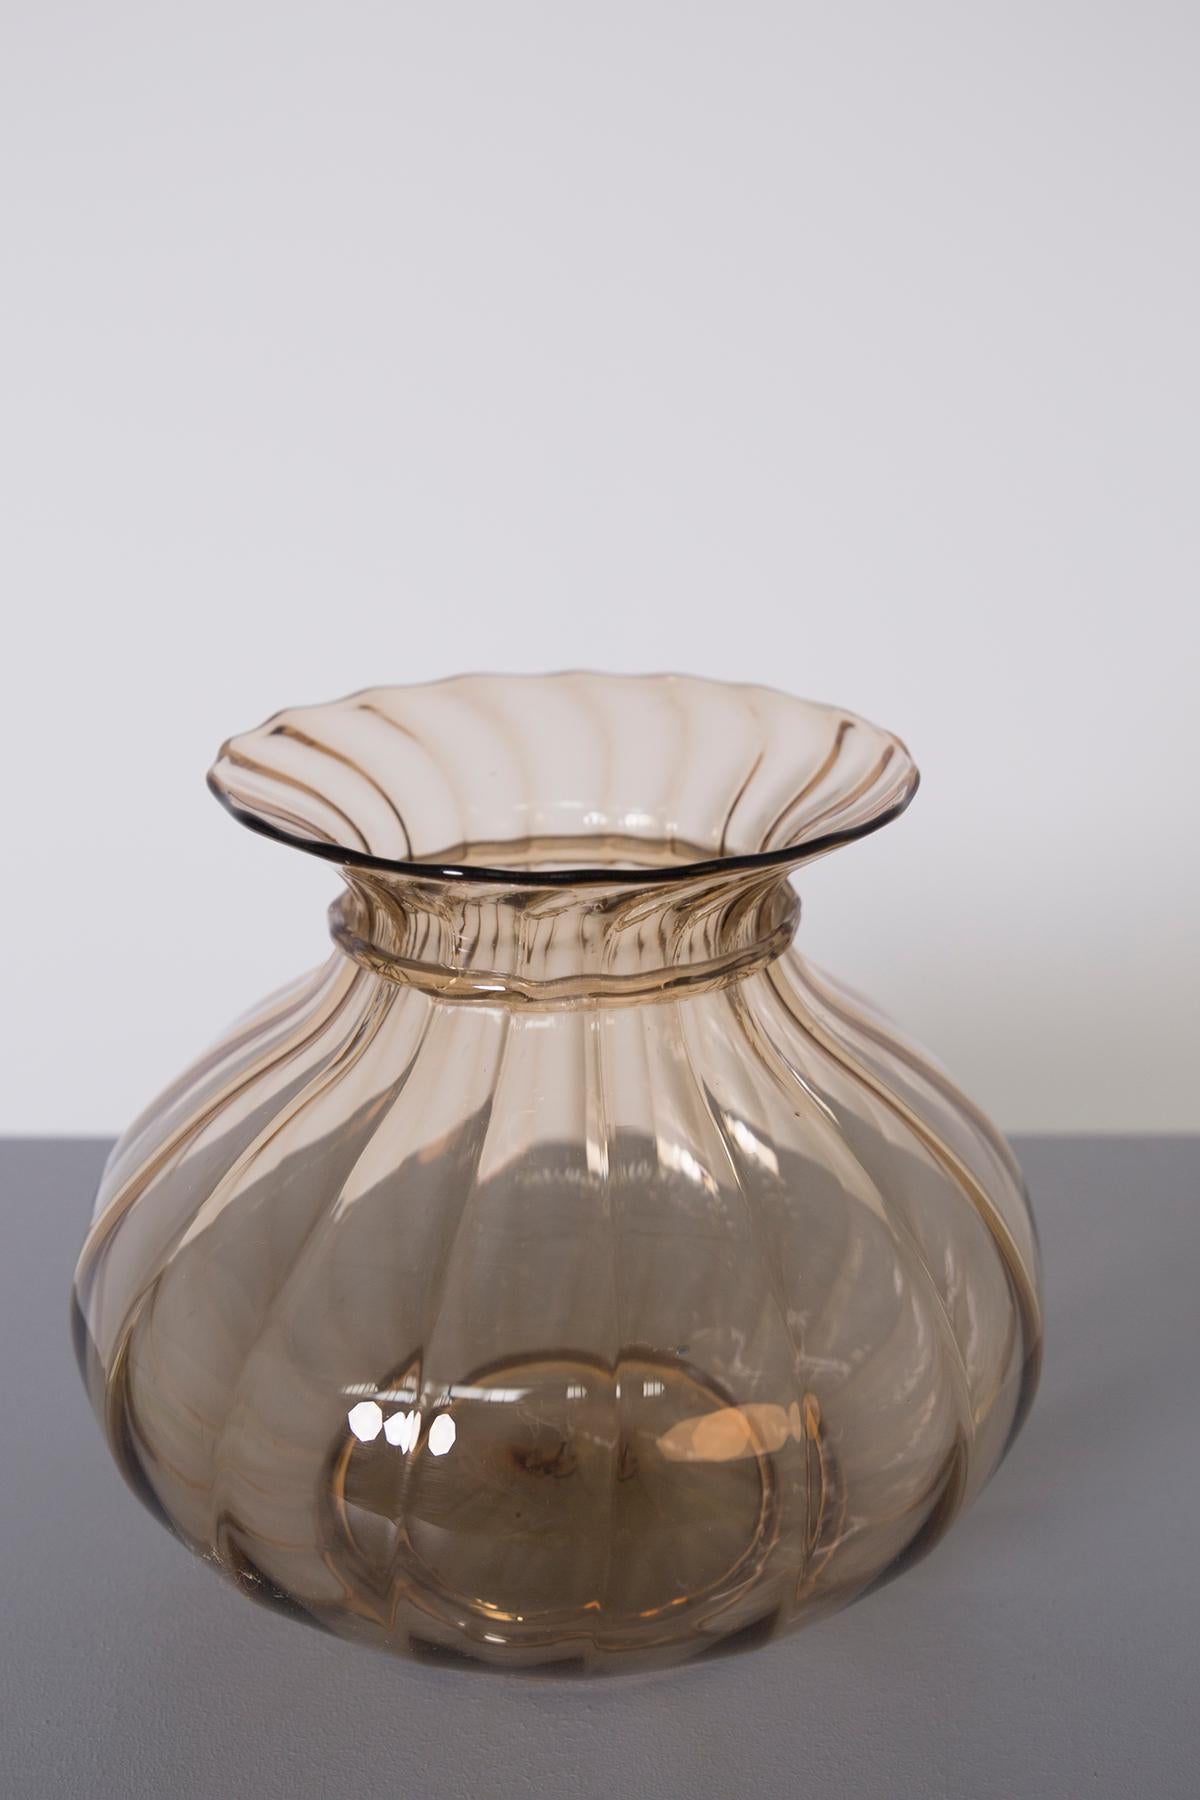 Elegant Murano vase made by Venini in 1925. 
The vase is in clear amber and ribbed colored glass, with a slight torchon near the mouth of the vase. The vase is Mod. 3104 for Venini of 1925/26. Acid-etched signature on the base: Venini Murano.